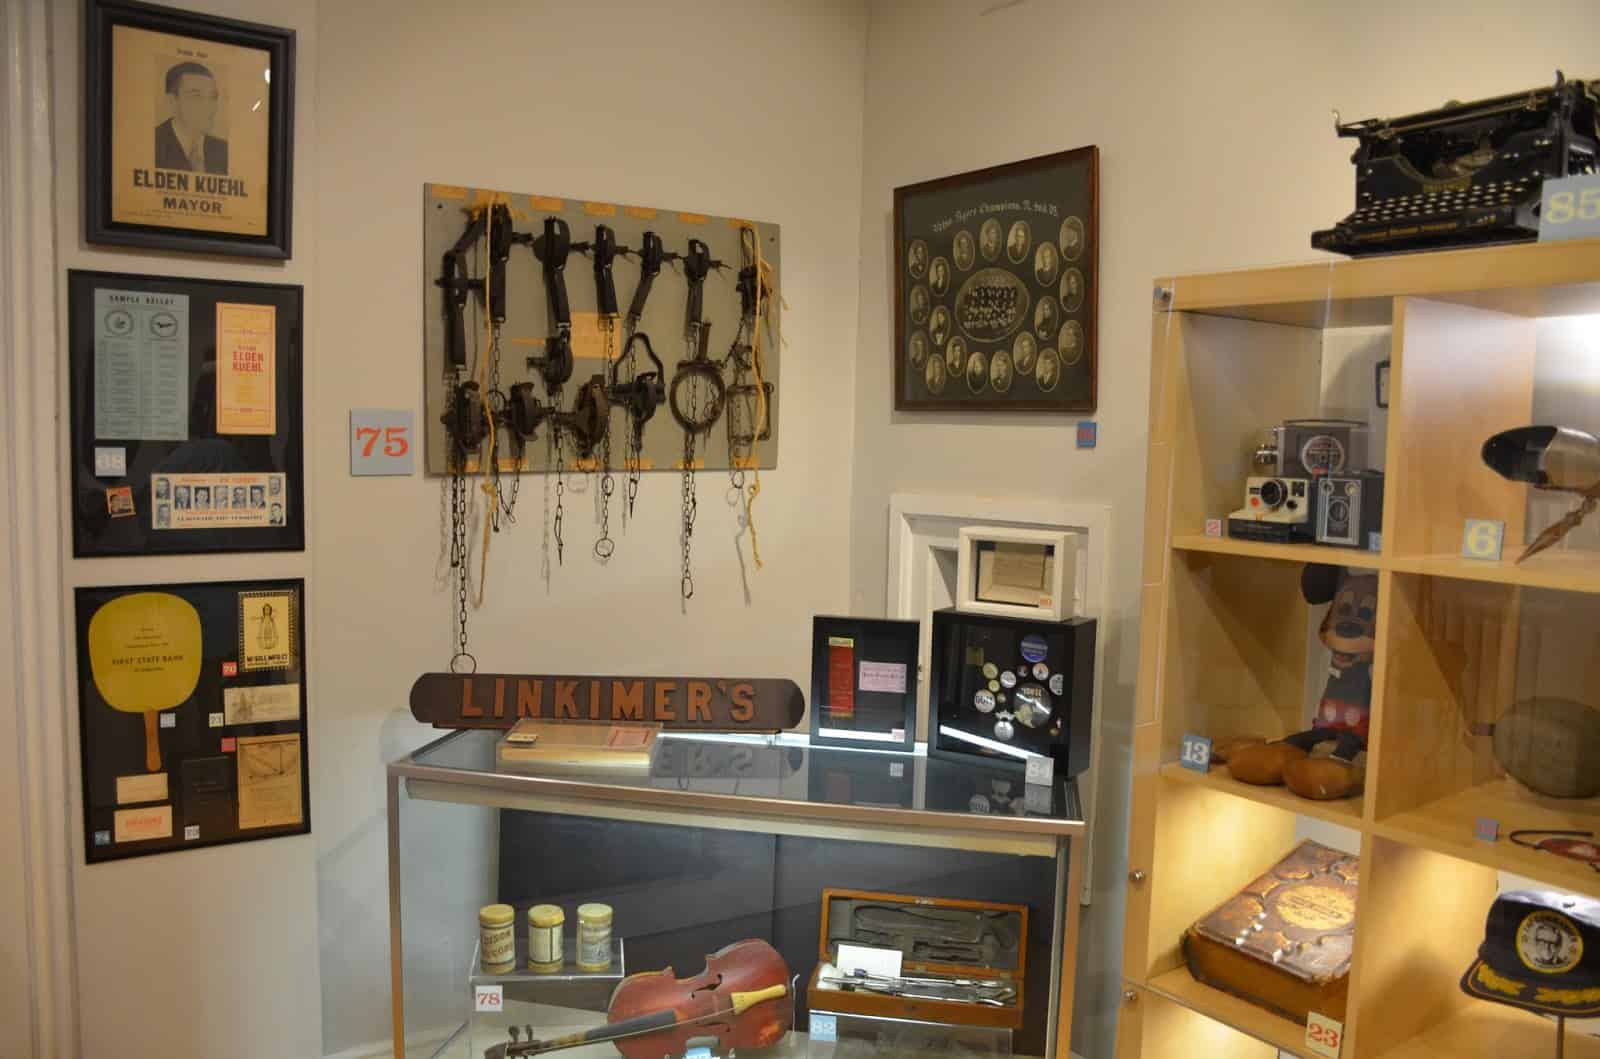 Local artifacts at the Porter County Museum in Valparaiso, Indiana